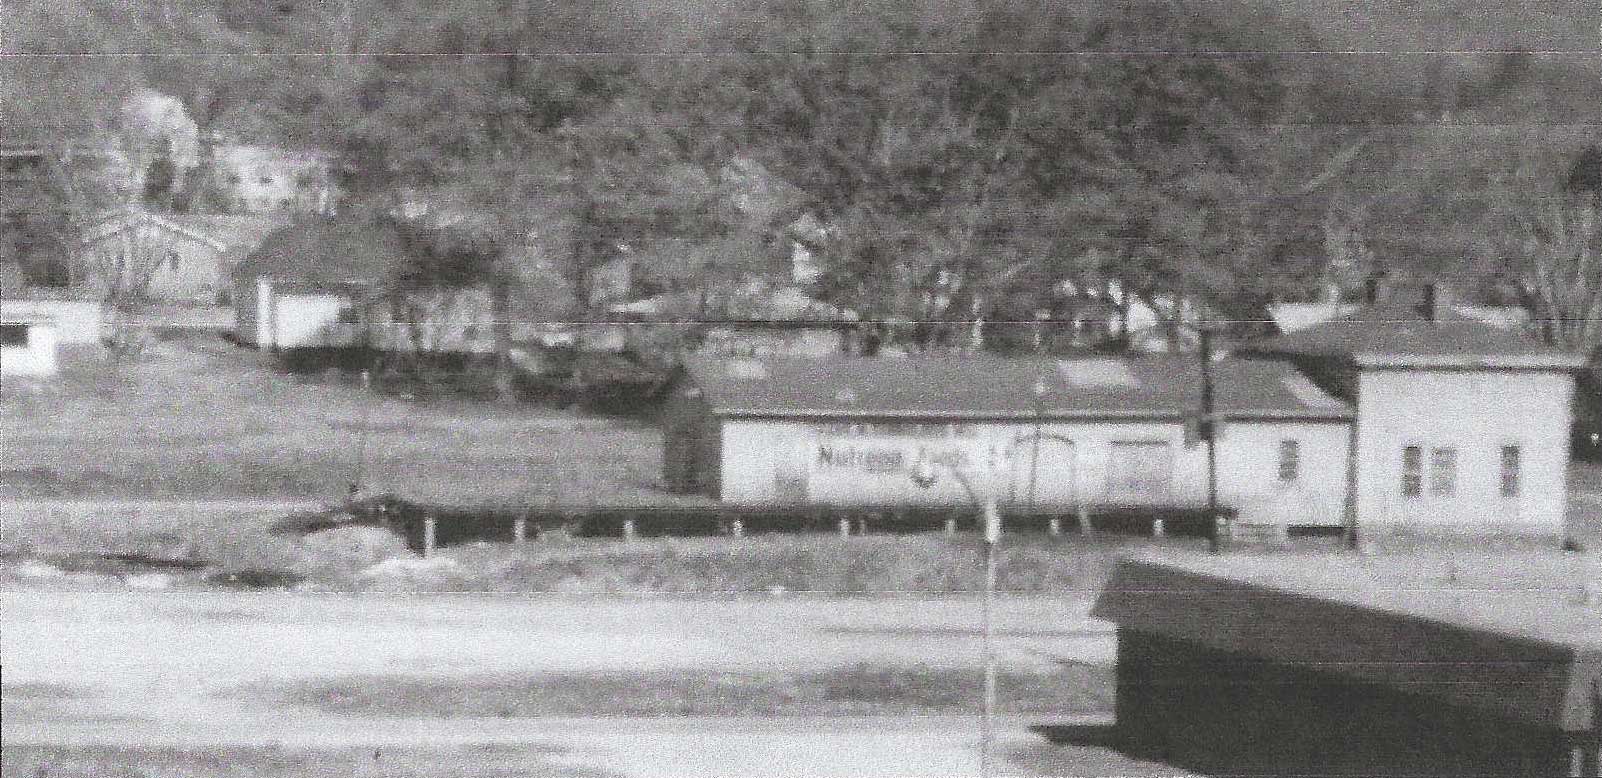 distant view of oxford train depot